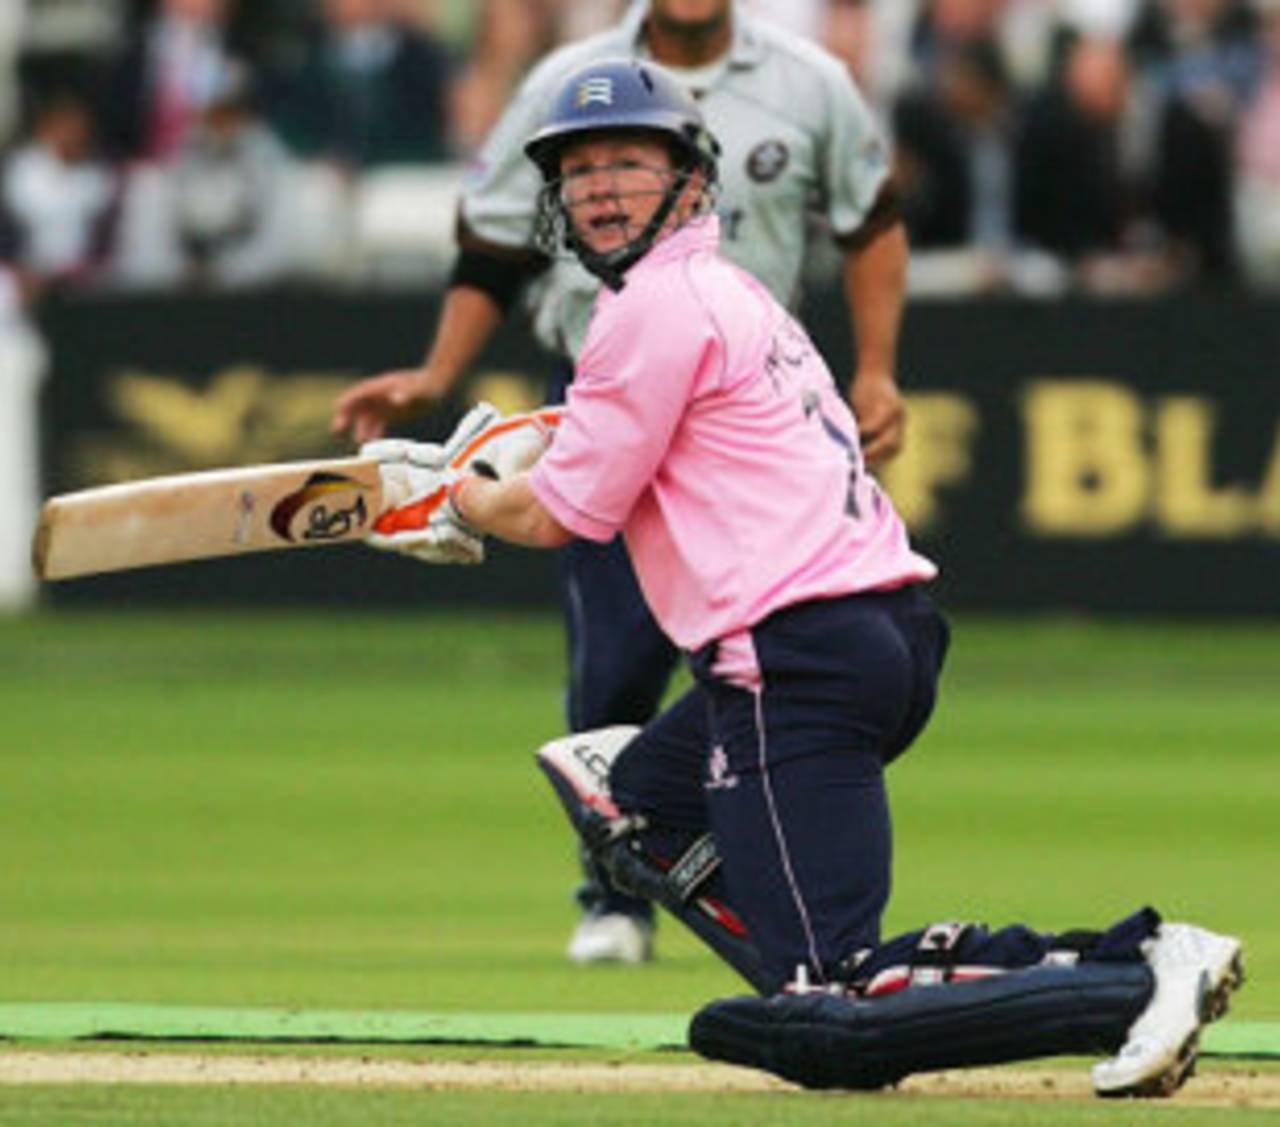 Eoin Morgan reverse sweeps against Surrey, Surrey v Middlesex, Twenty20 Cup, Lord's, July 3, 2008